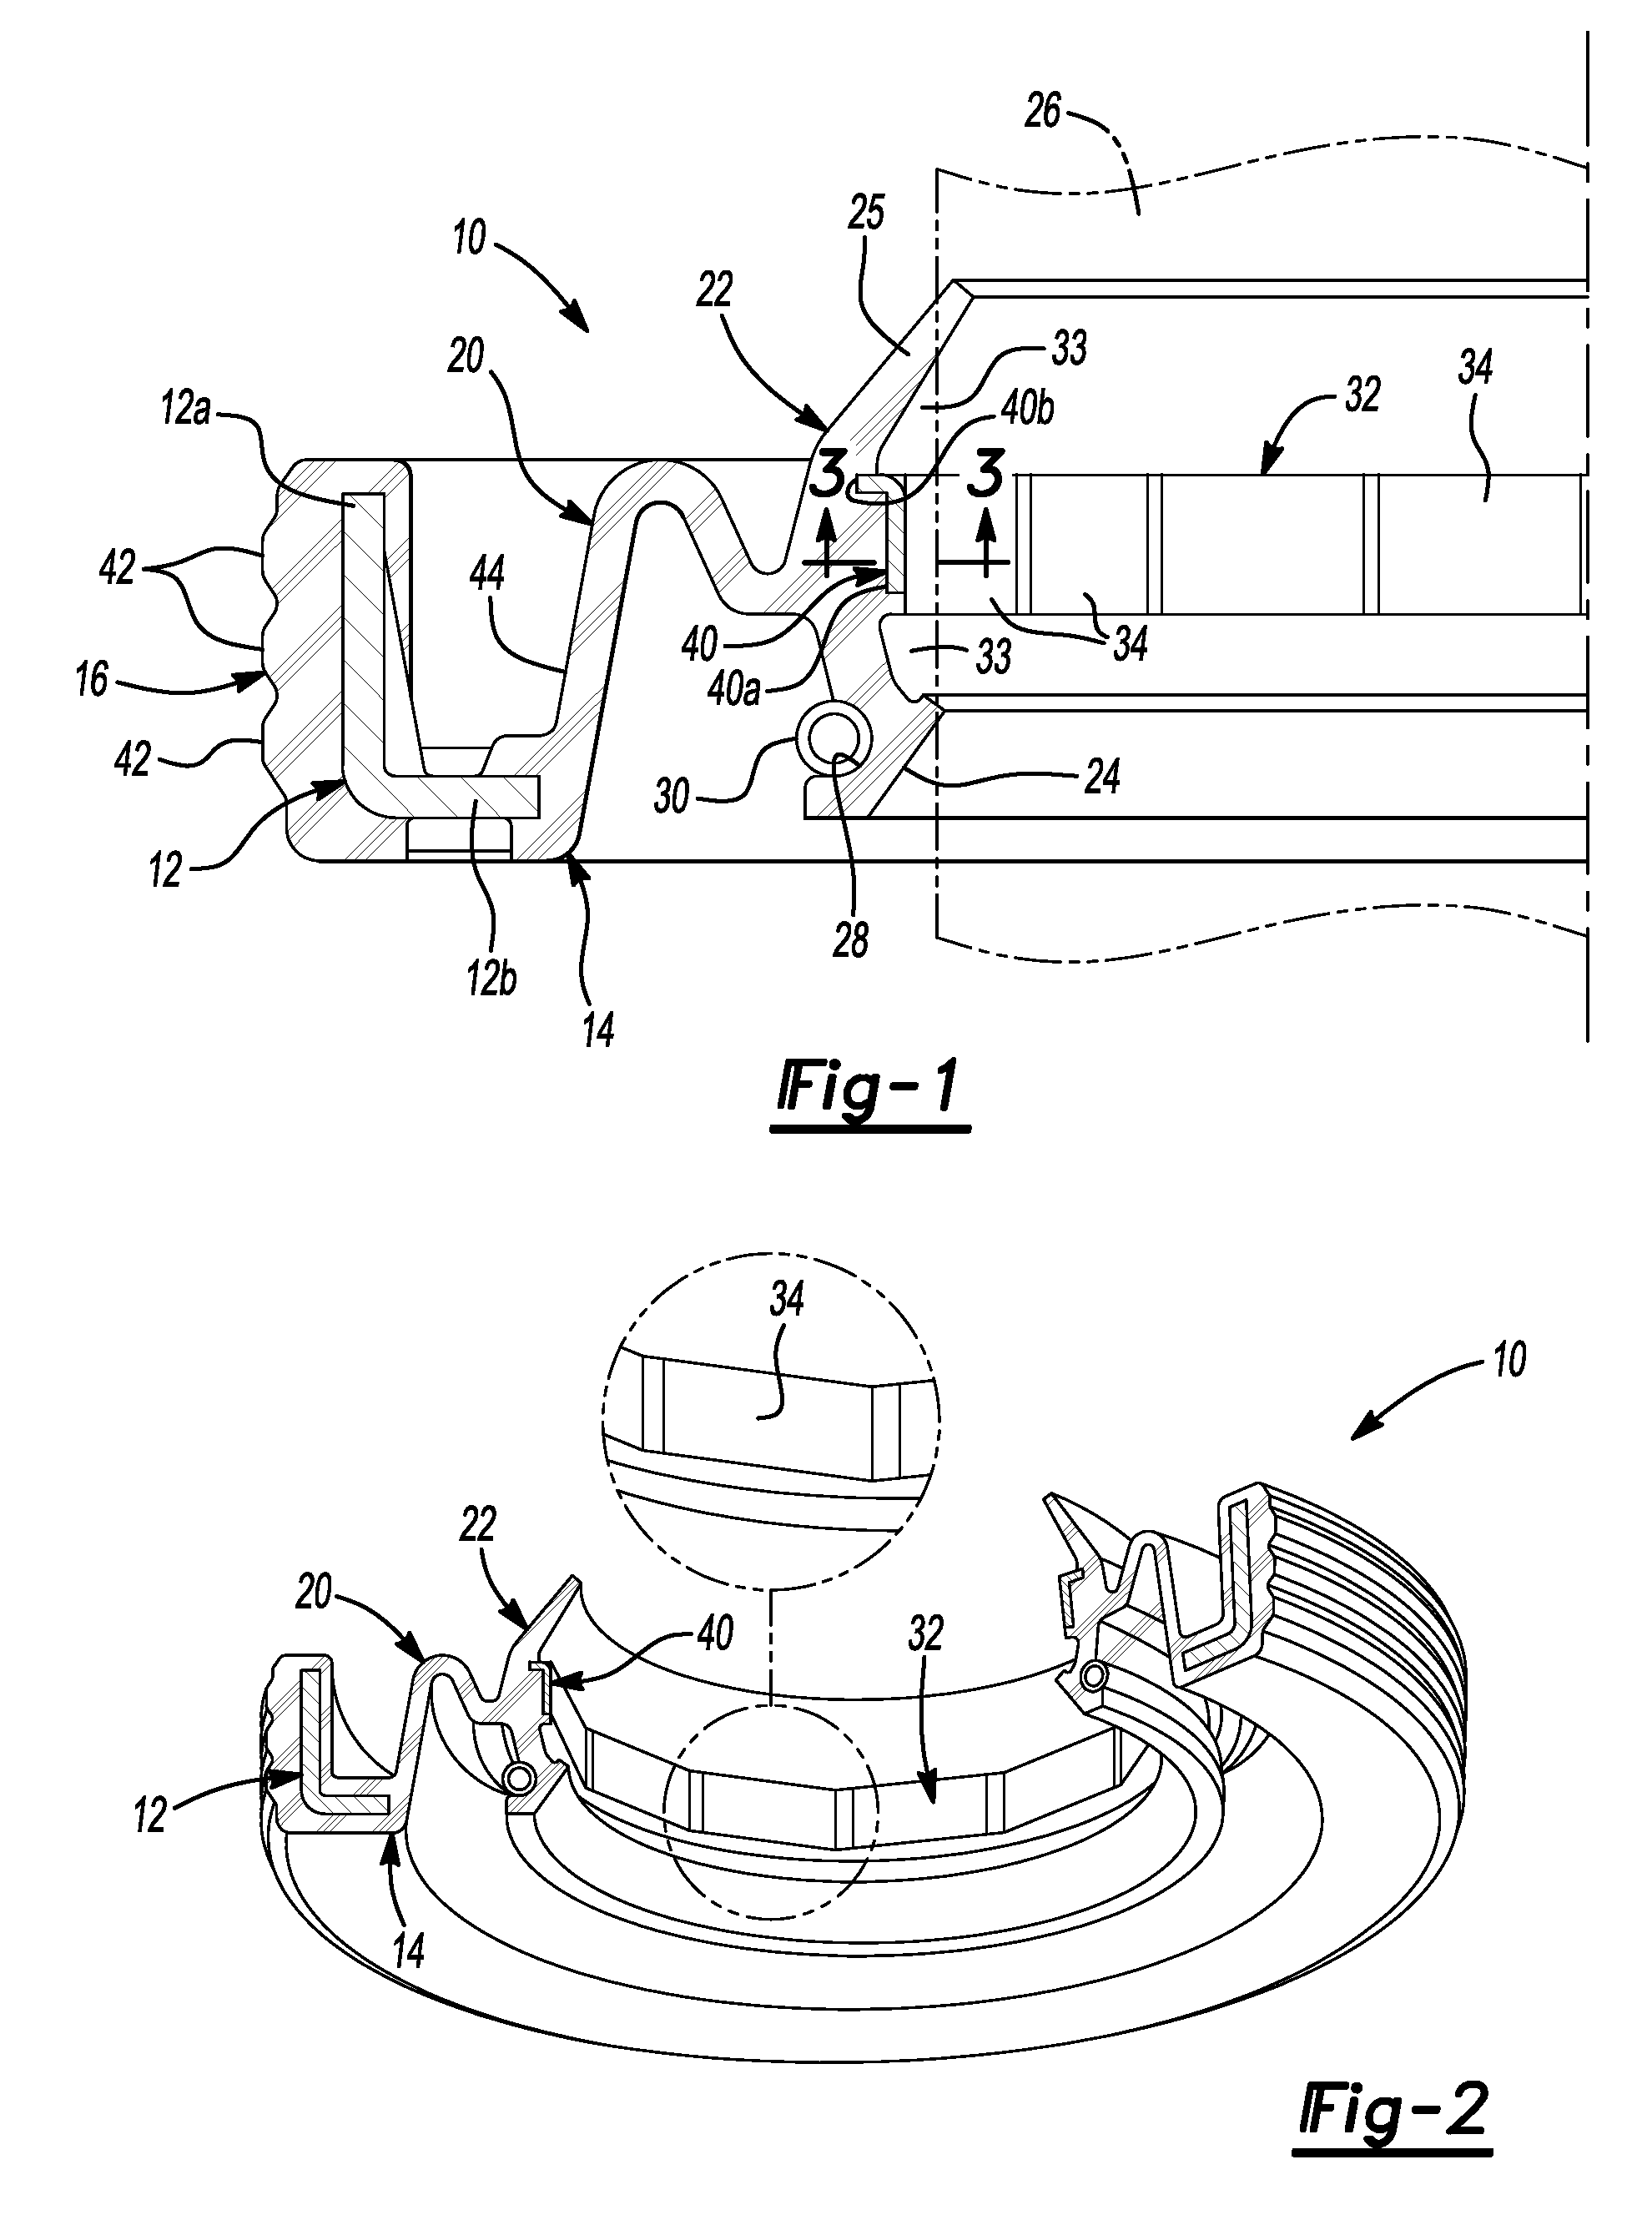 Prelubricated Multi-Lipped Radial Shaft Seal With Large Radial Offset Accommodation